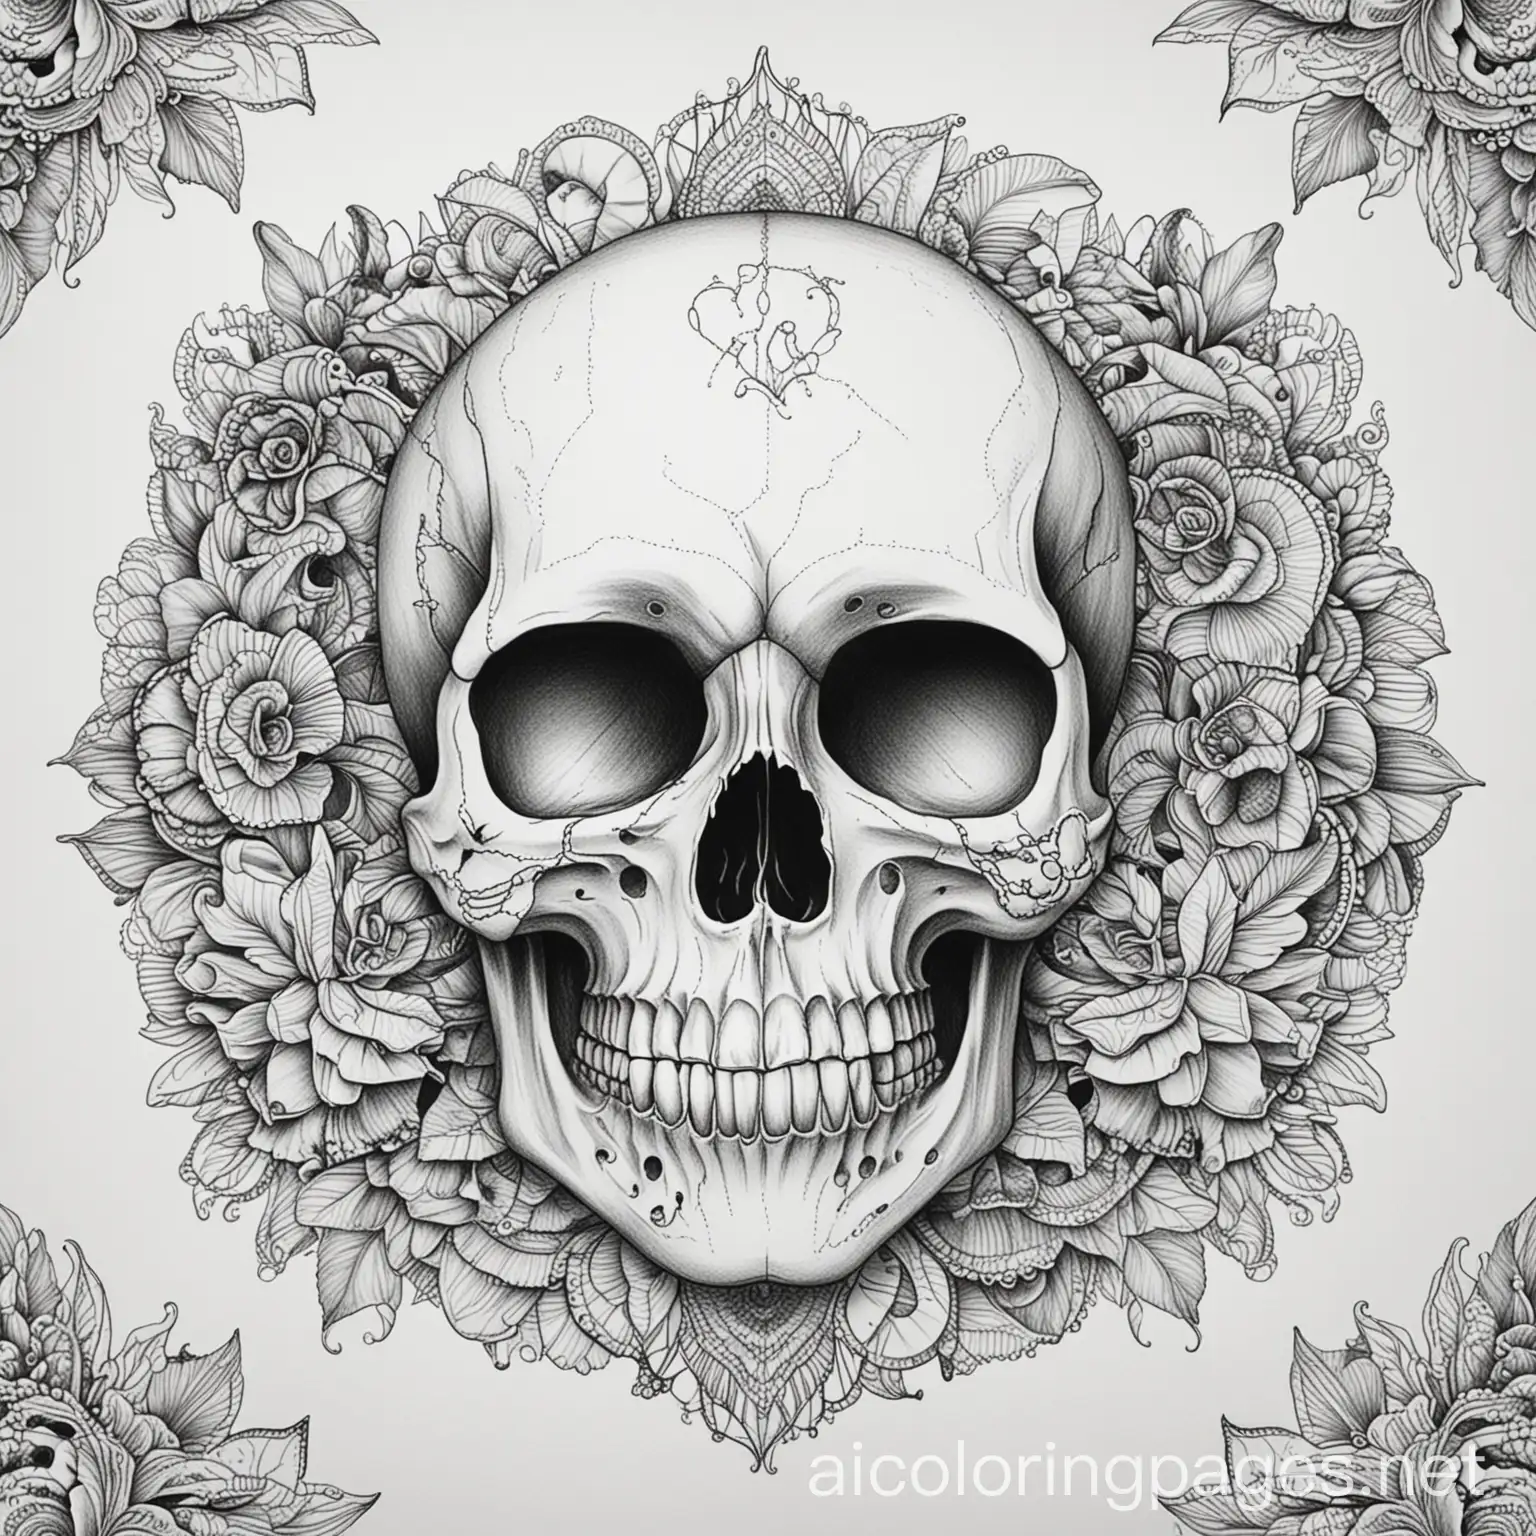 25 page  coloring book skulls, Coloring Page, black and white, line art, white background, Simplicity, Ample White Space. The background of the coloring page is plain white to make it easy for young children to color within the lines. The outlines of all the subjects are easy to distinguish, making it simple for kids to color without too much difficulty